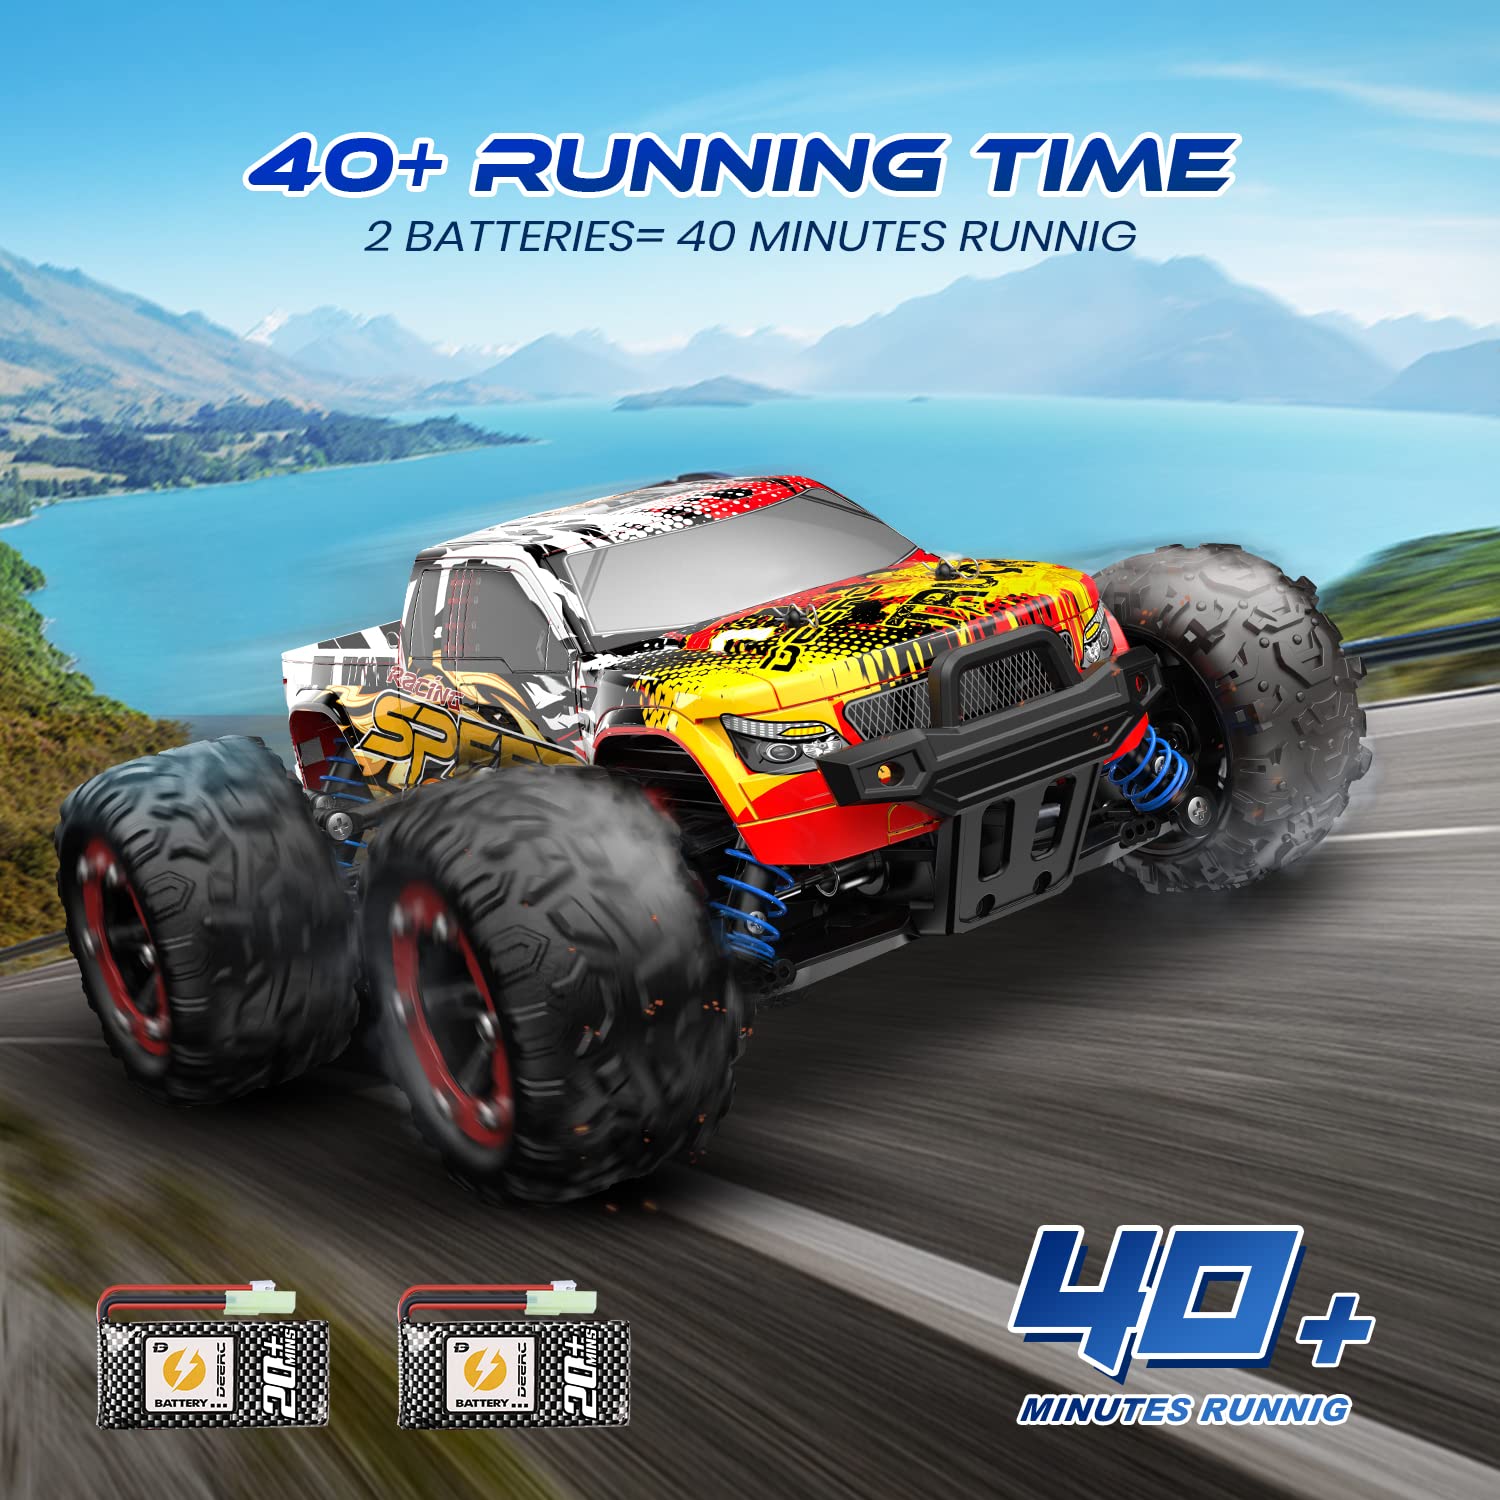 DEERC RC Cars 9310 High Speed Remote Control Car for Adults Kids 30+MP